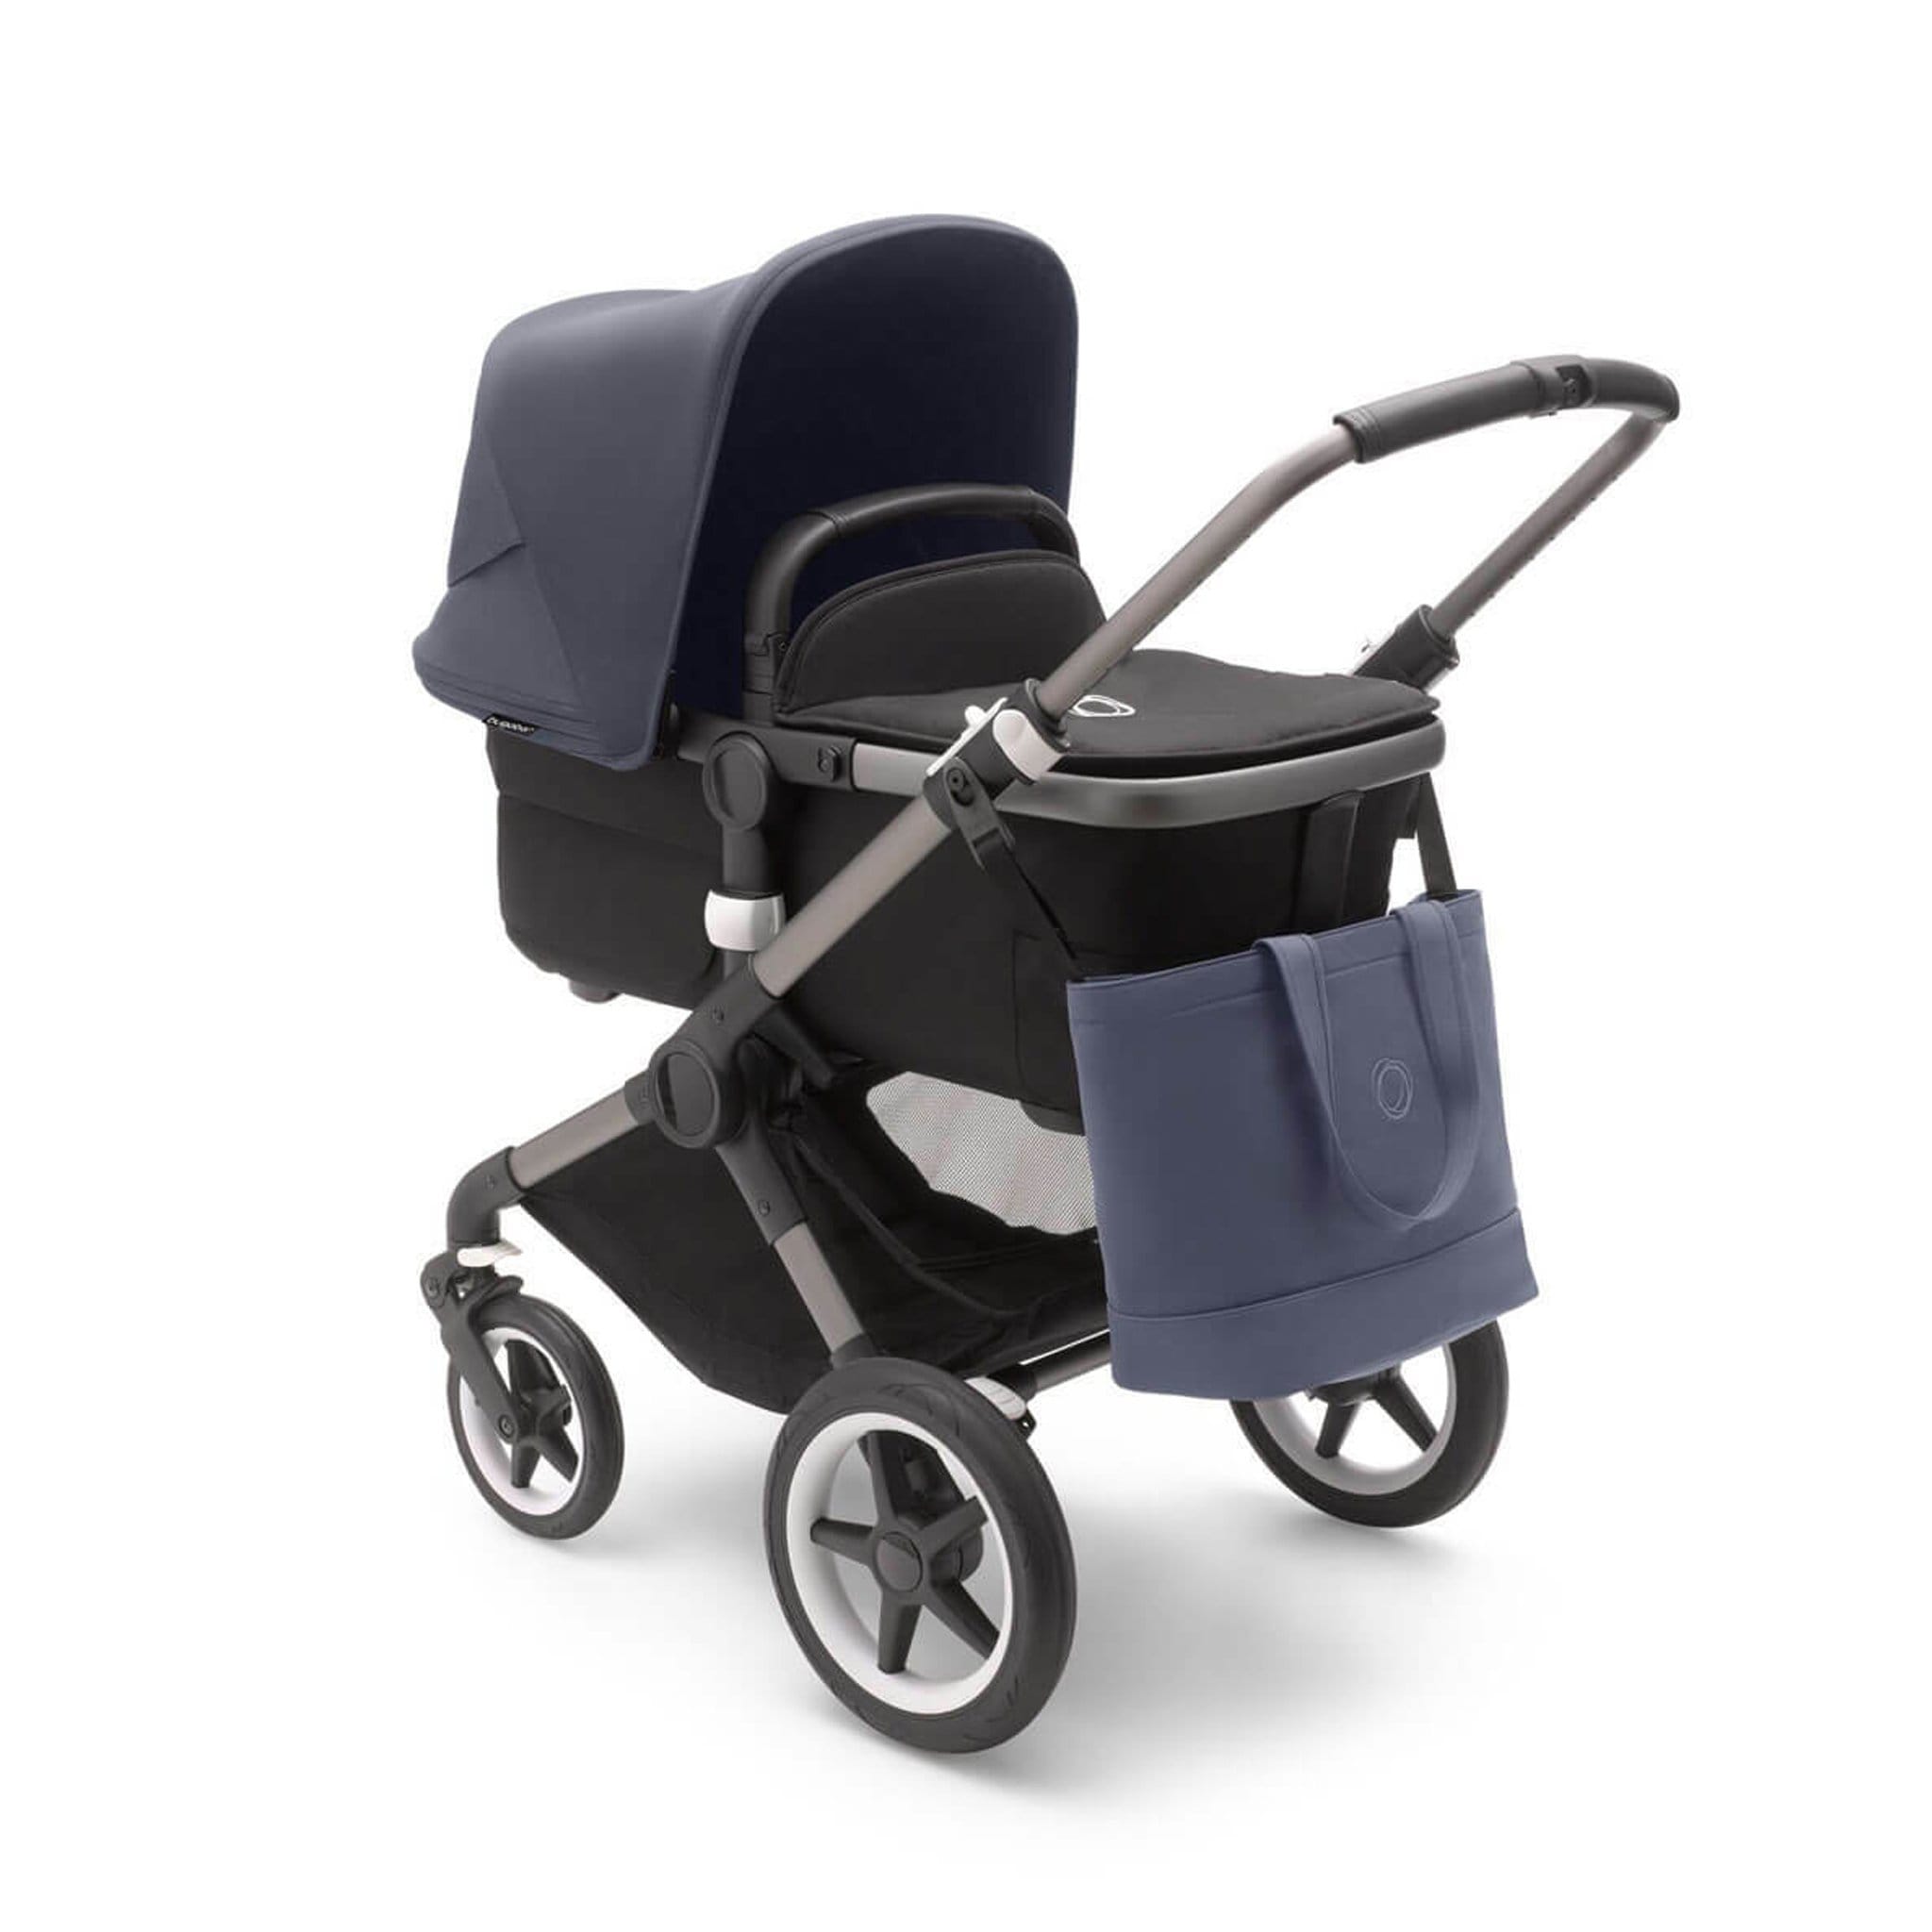 Bugaboo Changing Bag in Stormy Blue Pram & Buggy Carry Bags 2306010090 8717447144182